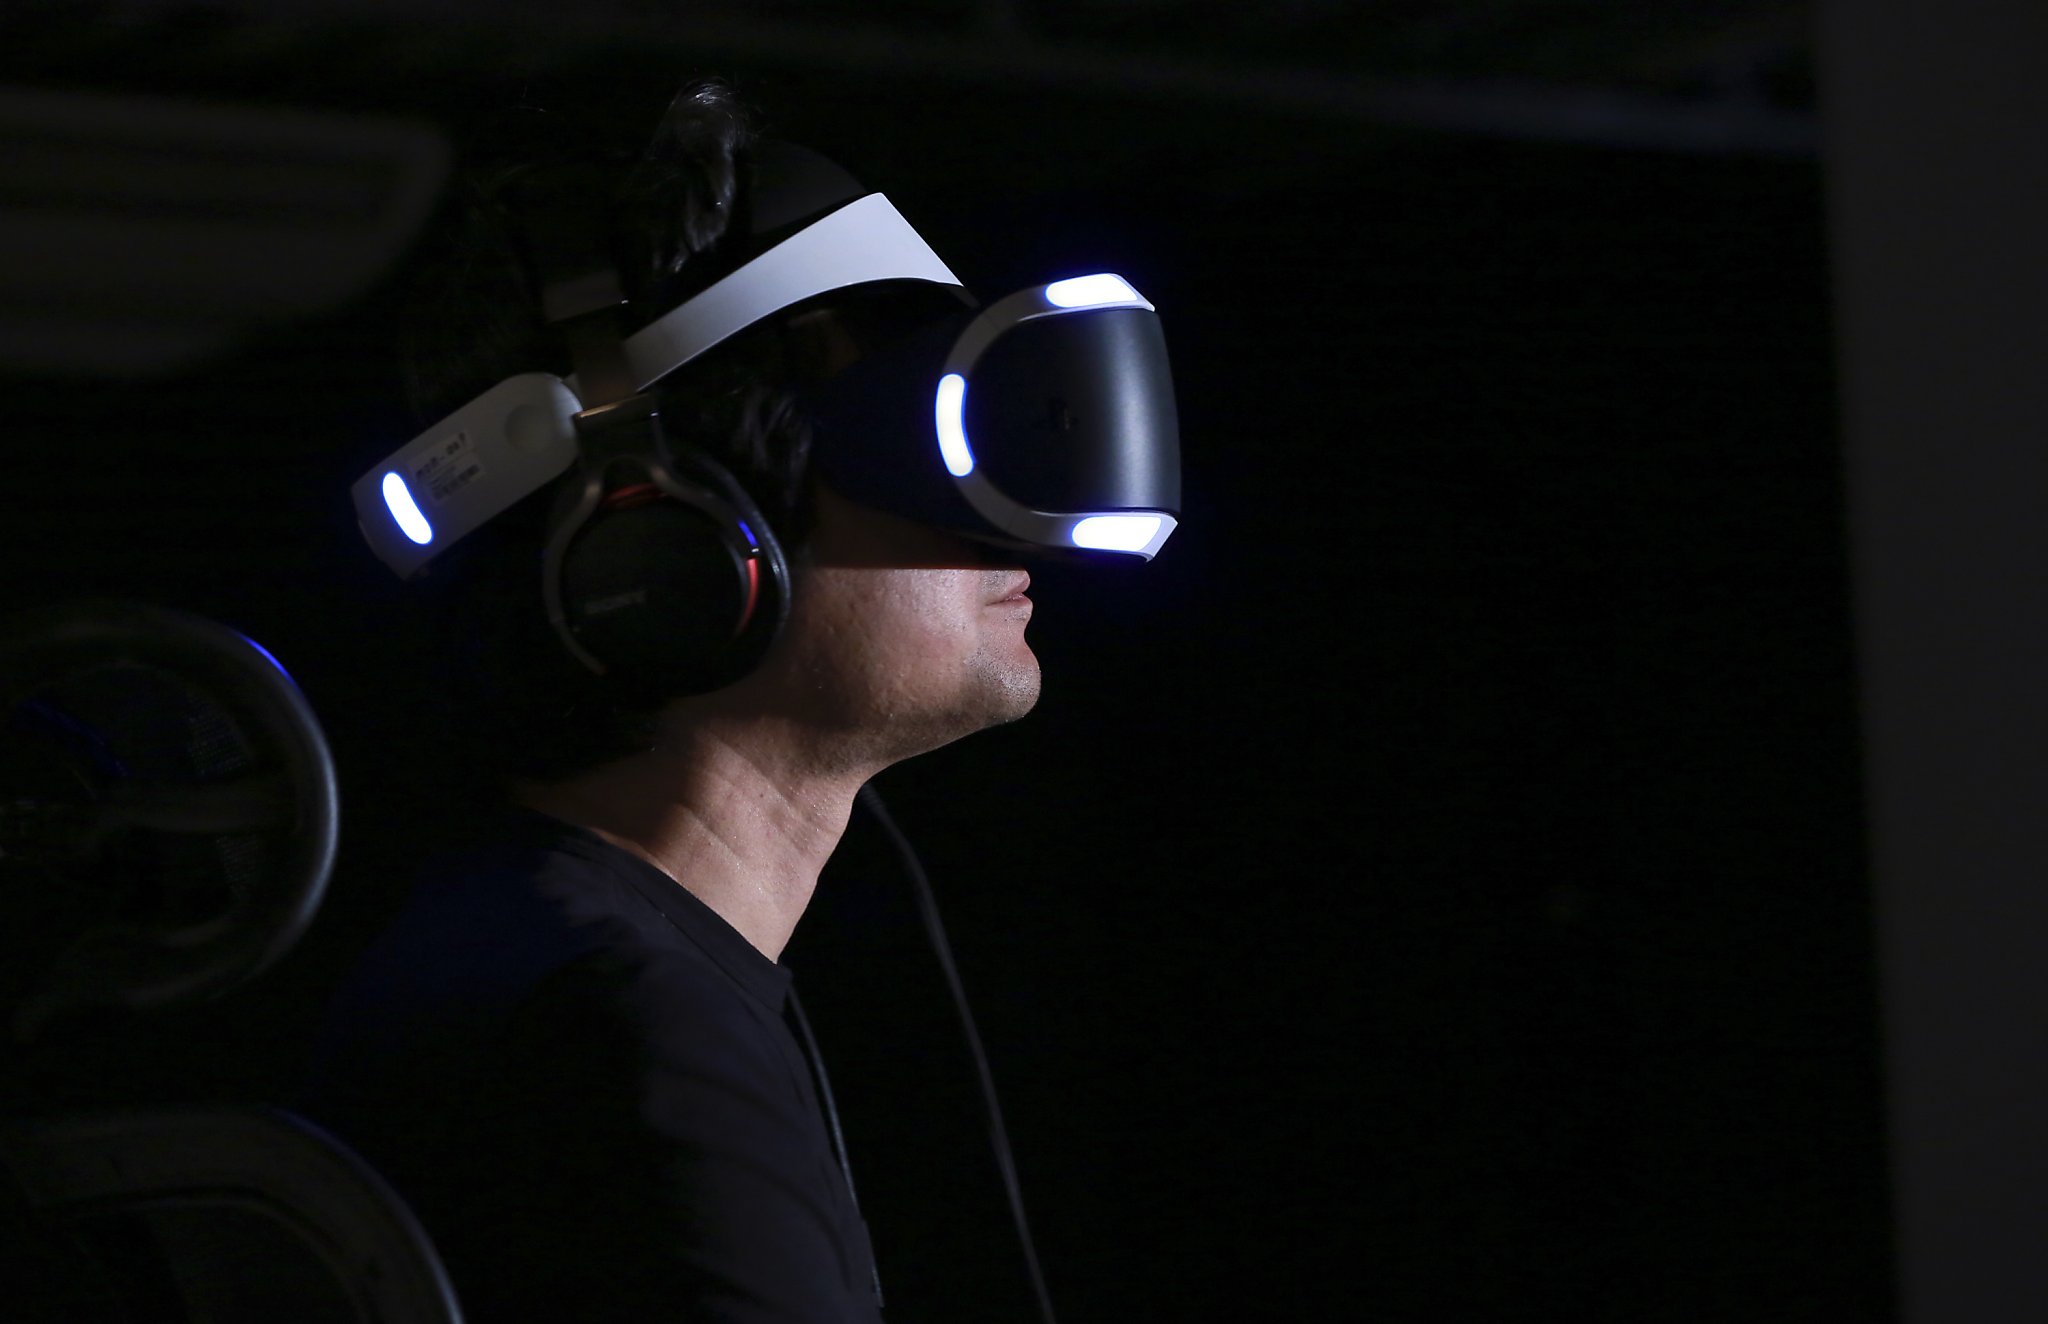 Review: PlayStation VR a to virtual reality